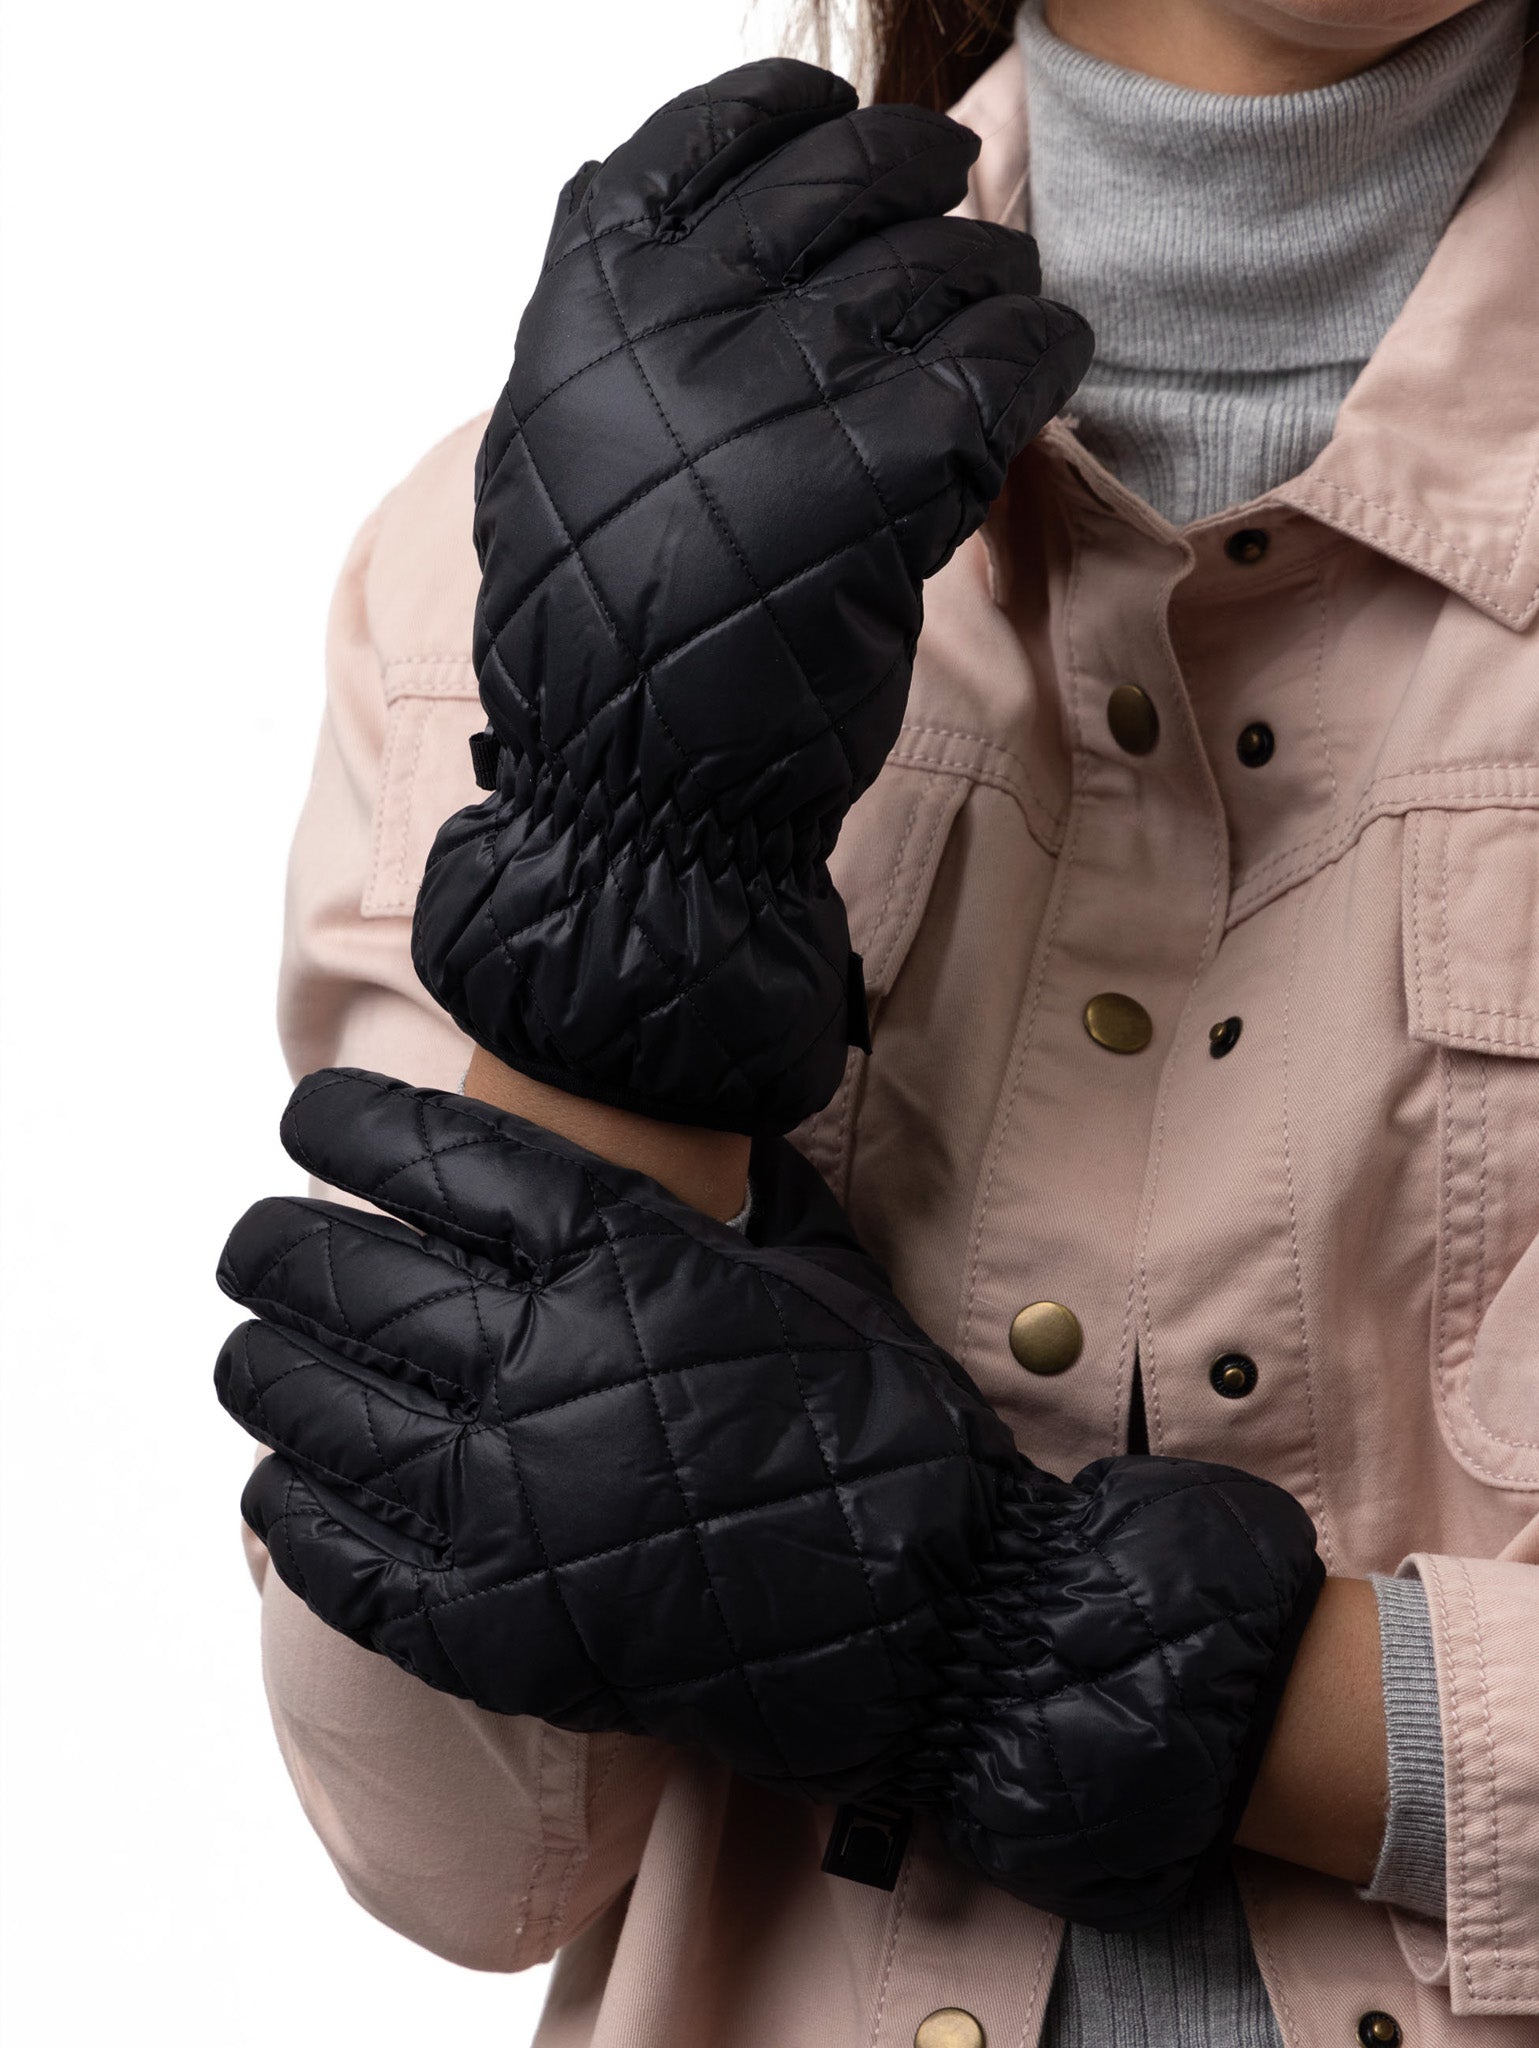 HEAT HOLDERS Bryce Quilted Gloves - Womens